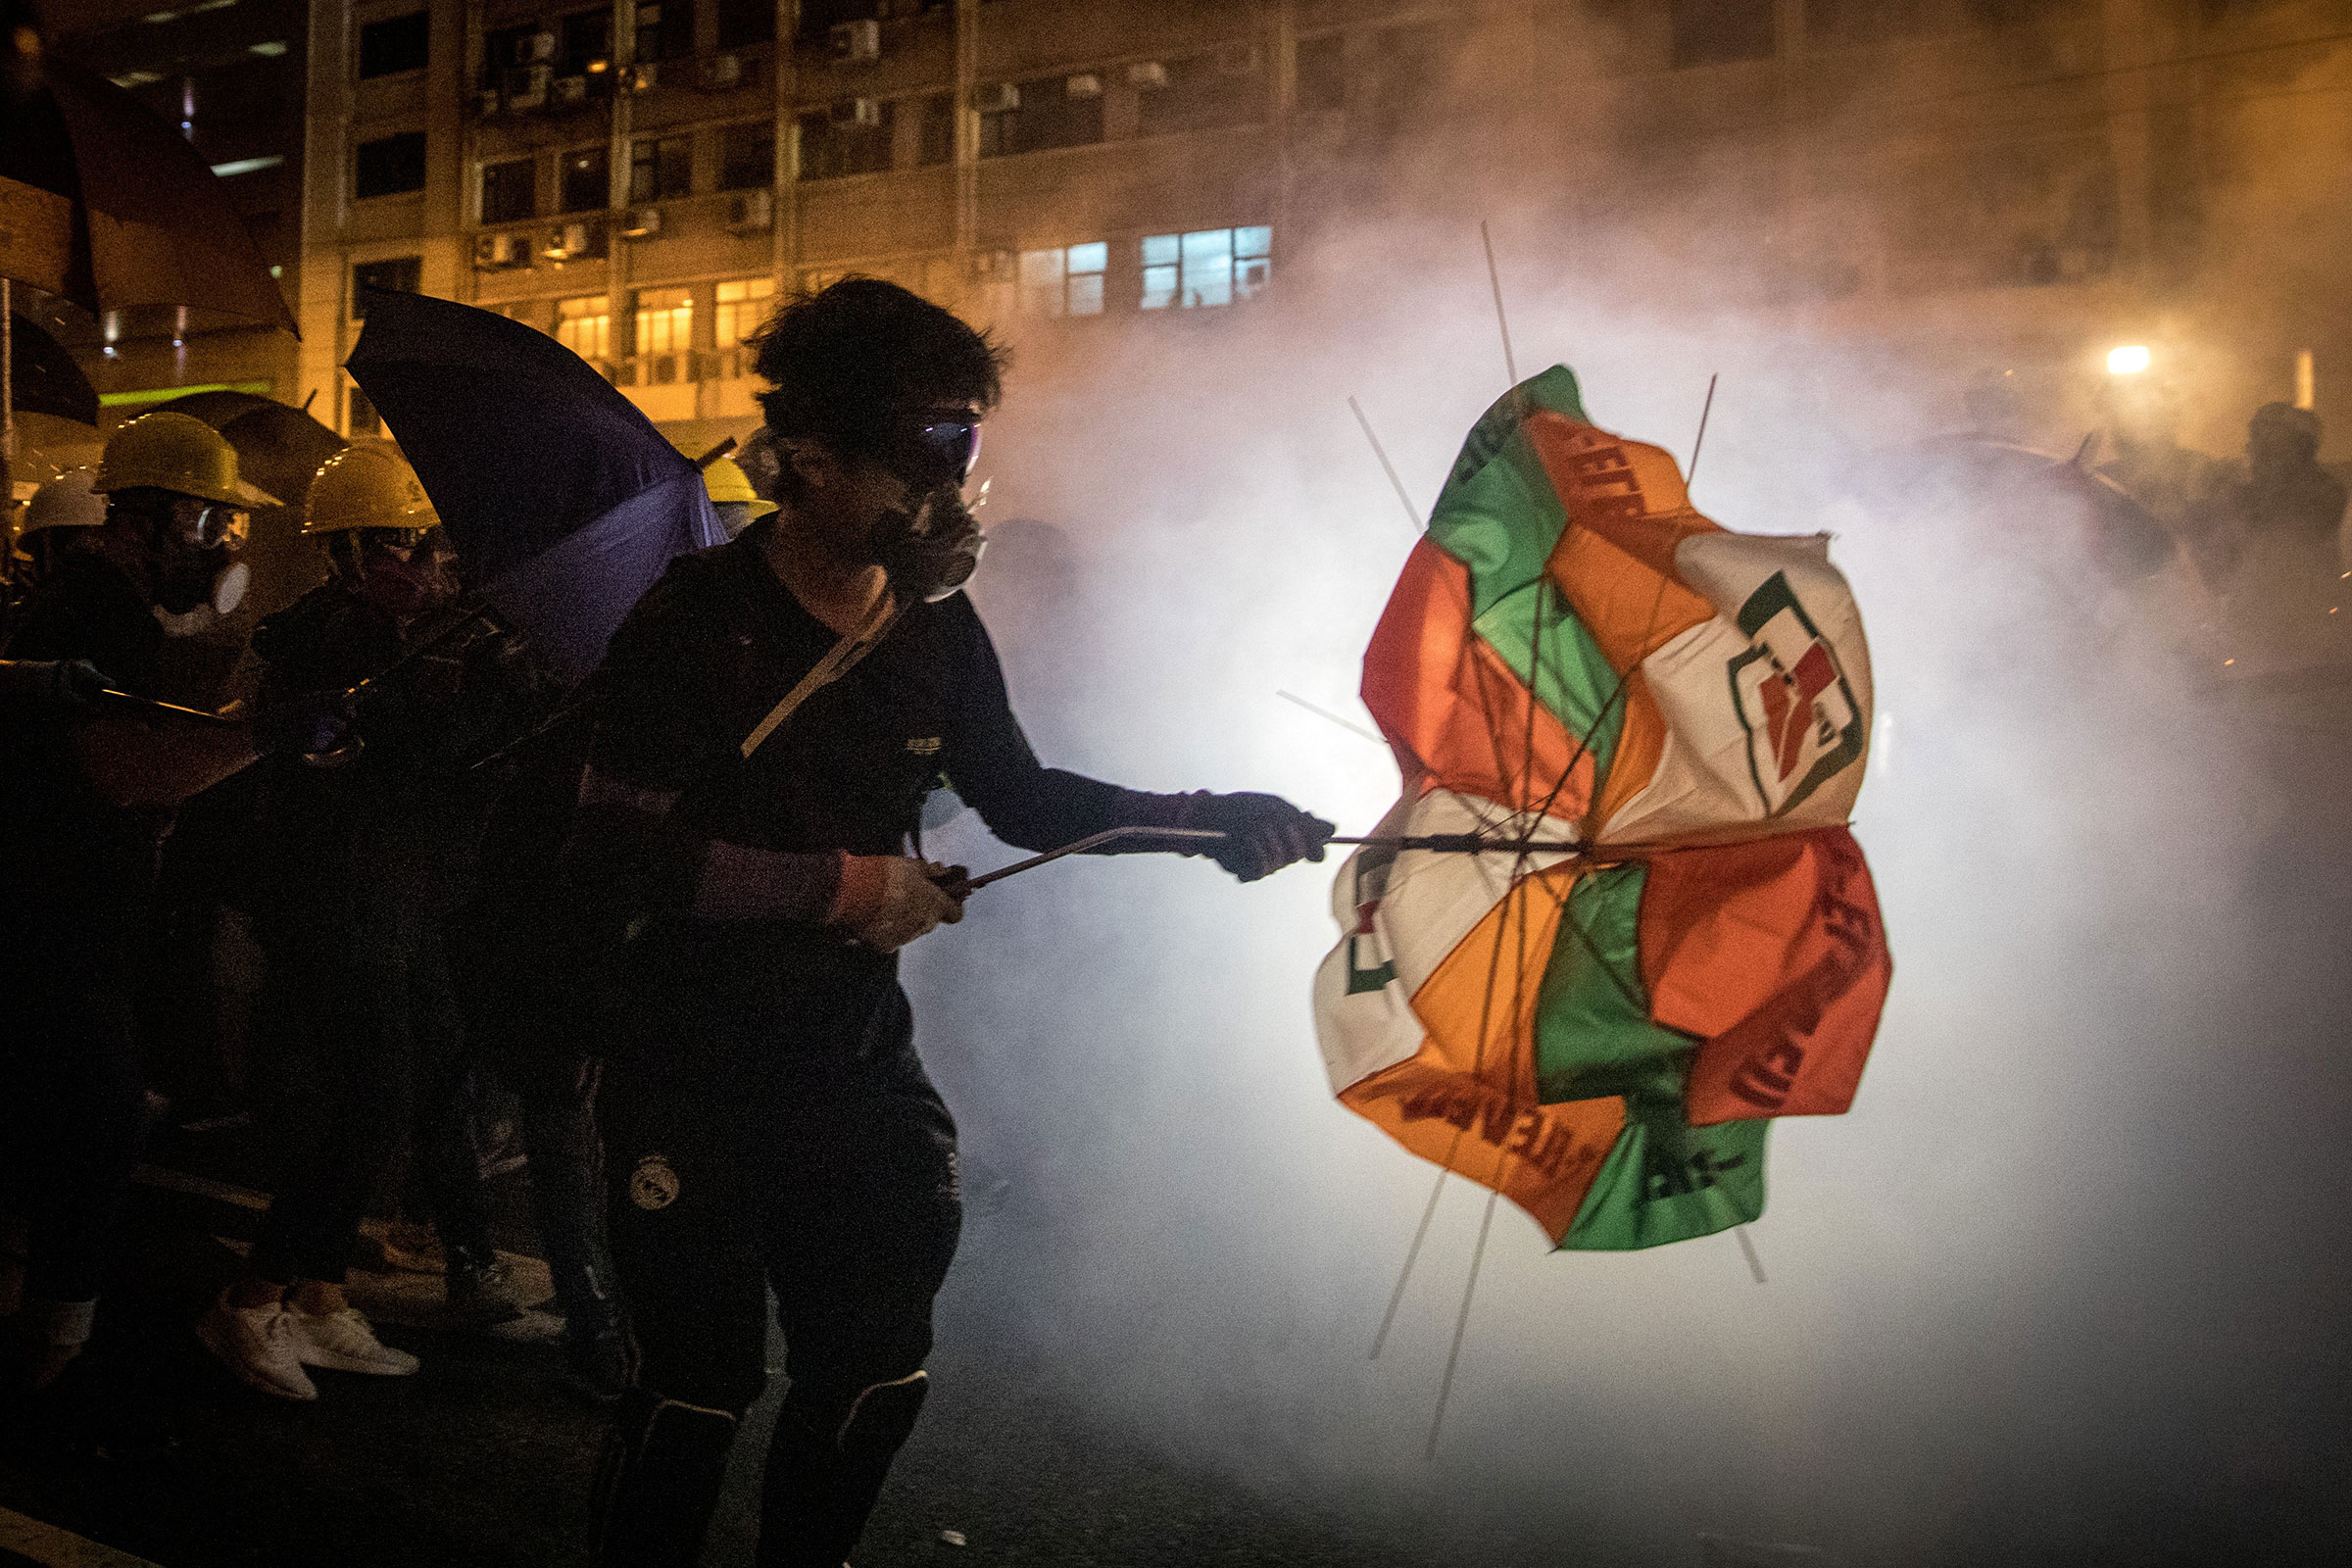 Protesters clash with police amid tear gas after taking part in an anti-extradition bill march on July 21 in Hong Kong.